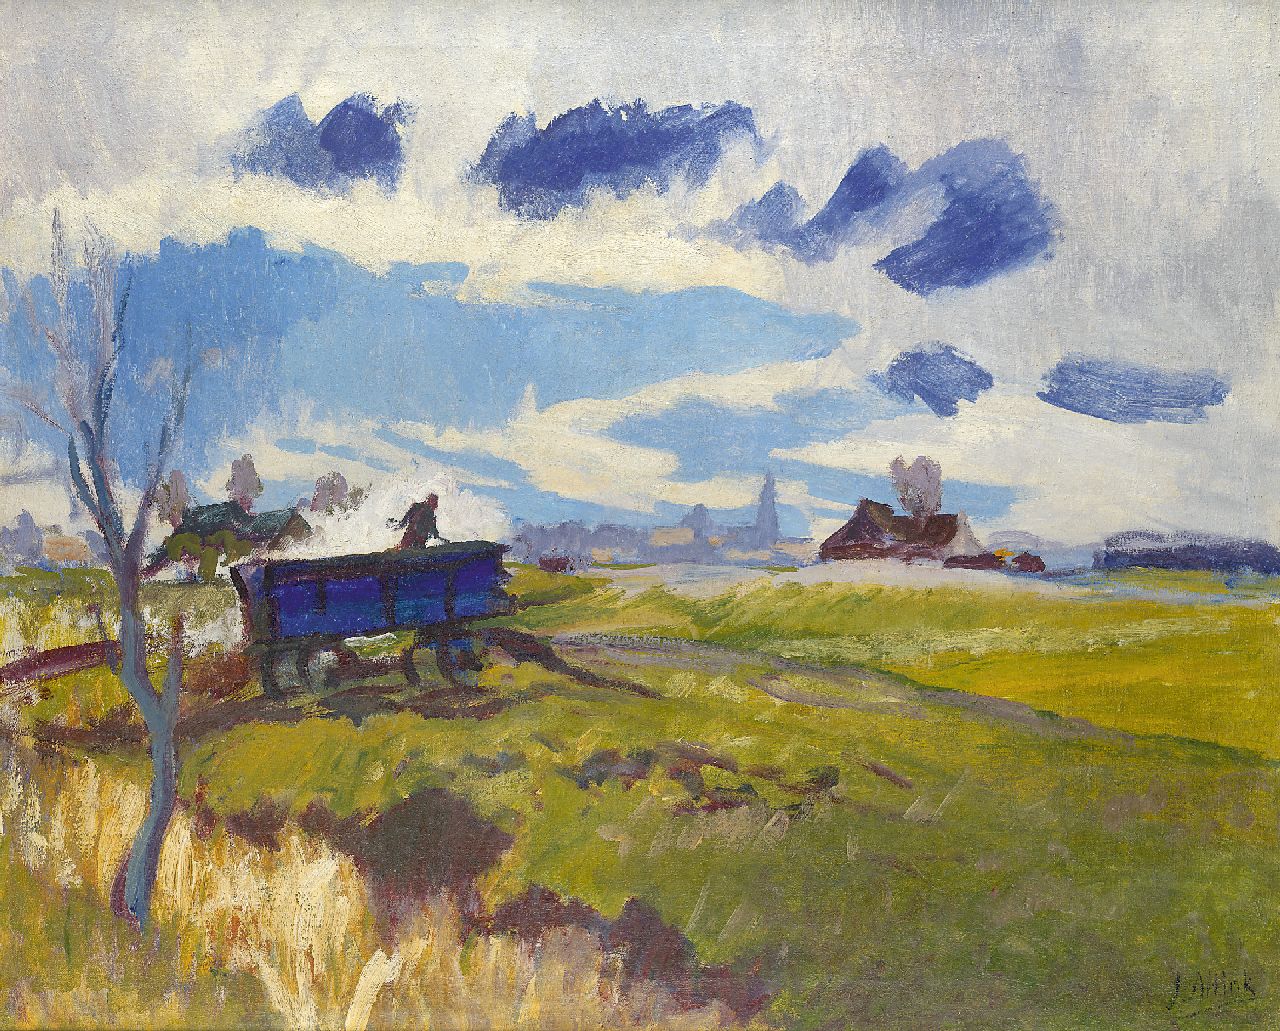 Altink J.  | Jan Altink, Landscape in Groningen with blue wagon, oil on canvas 64.1 x 78.2 cm, signed l.r. and executed ca. 1930